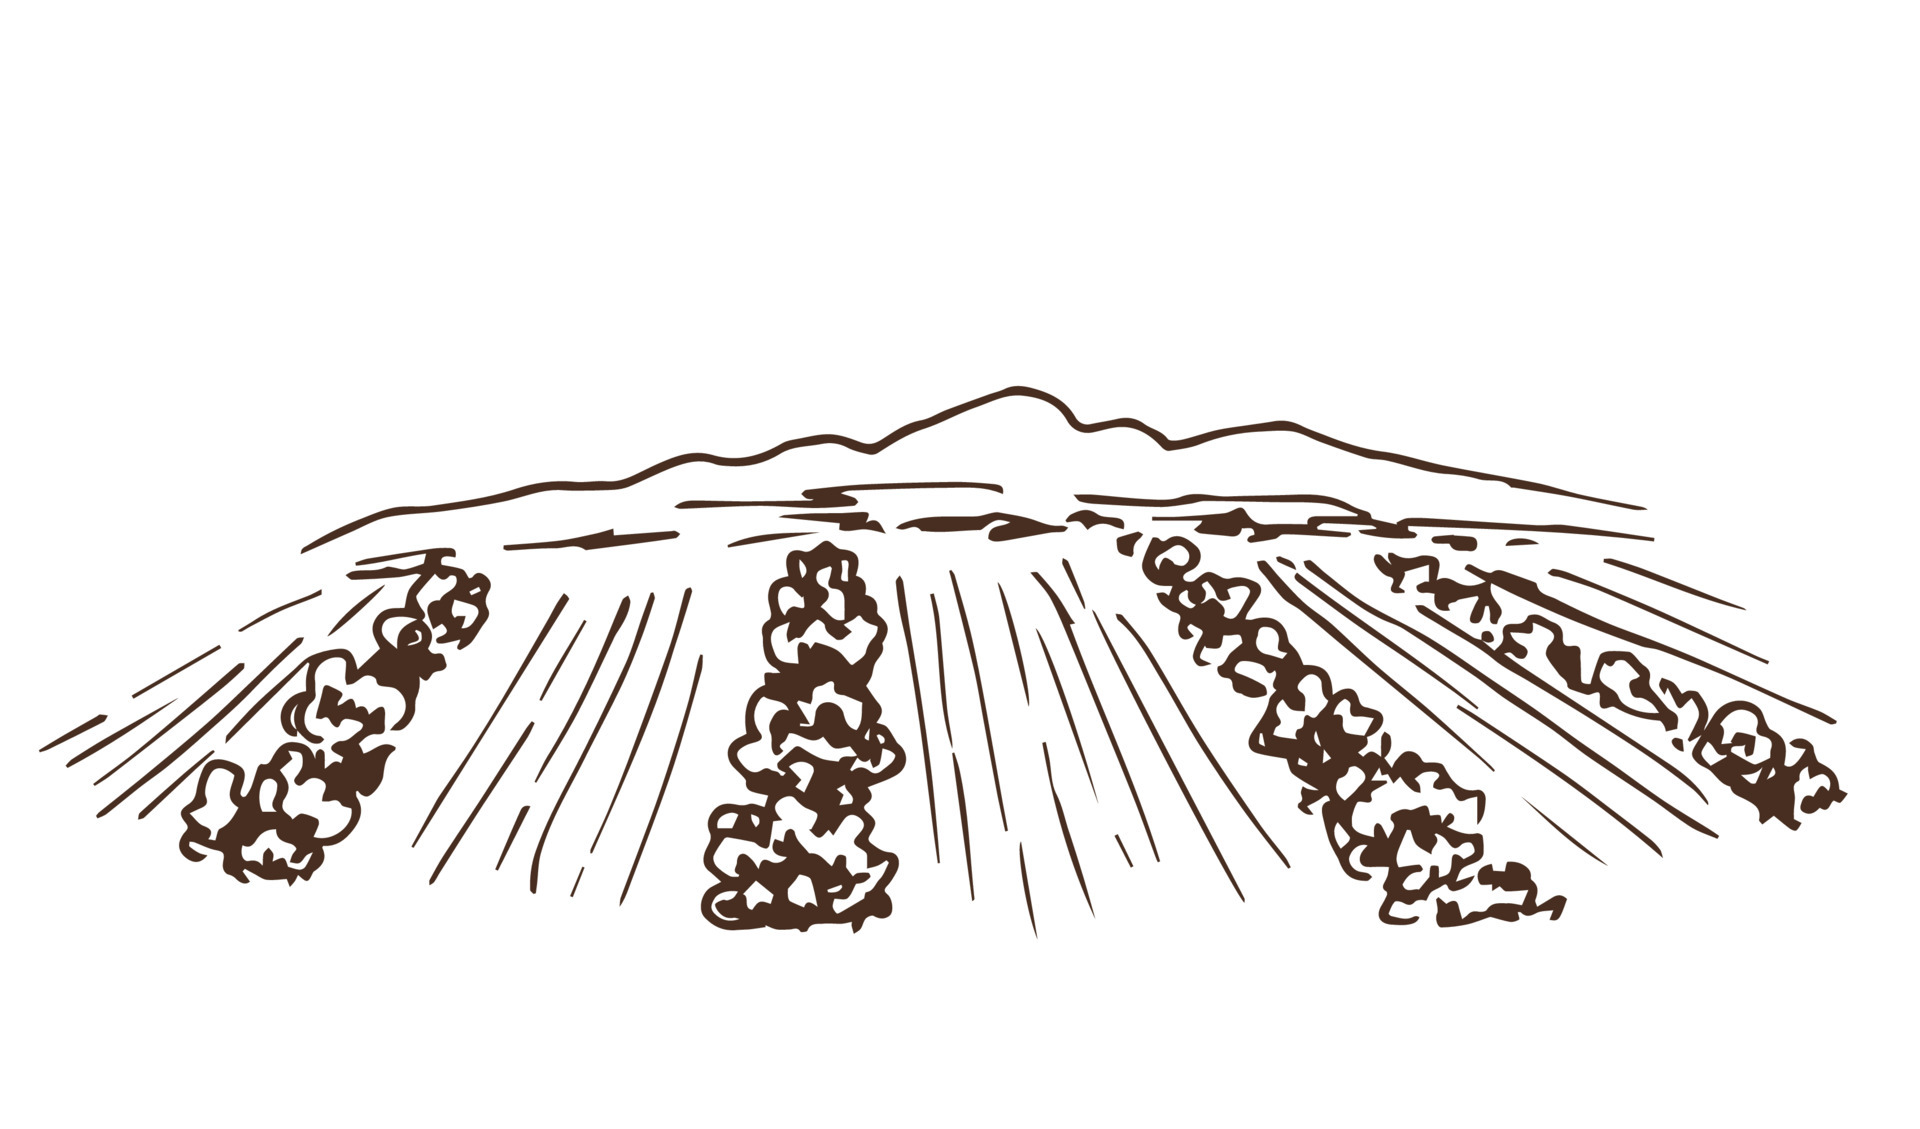 https://static.vecteezy.com/system/resources/previews/006/883/375/original/simple-outline-drawing-rustic-rural-landscape-rows-of-trees-bushes-vineyard-farm-fields-growing-plants-agriculture-garden-vector.jpg